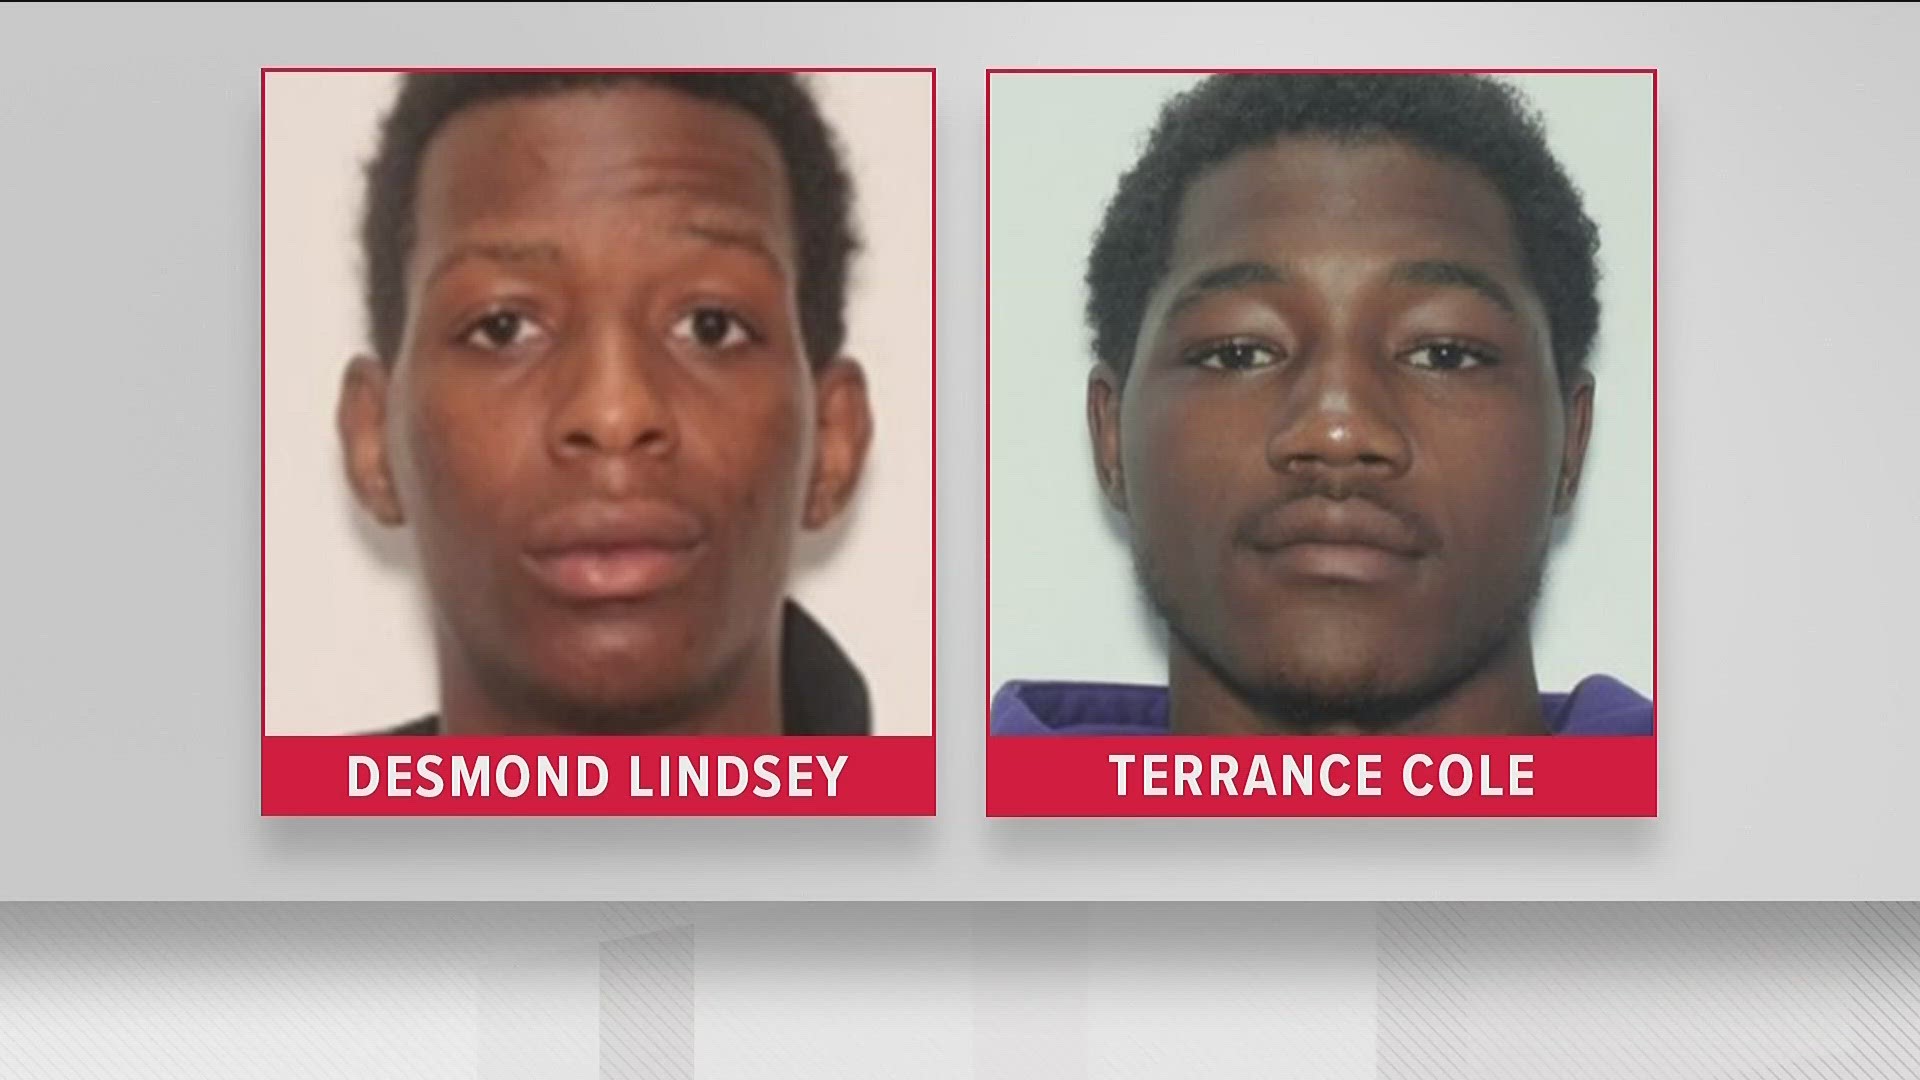 APD says two men are wanted for questioning in connection to the Jan. 2 shooting that left one man dead.